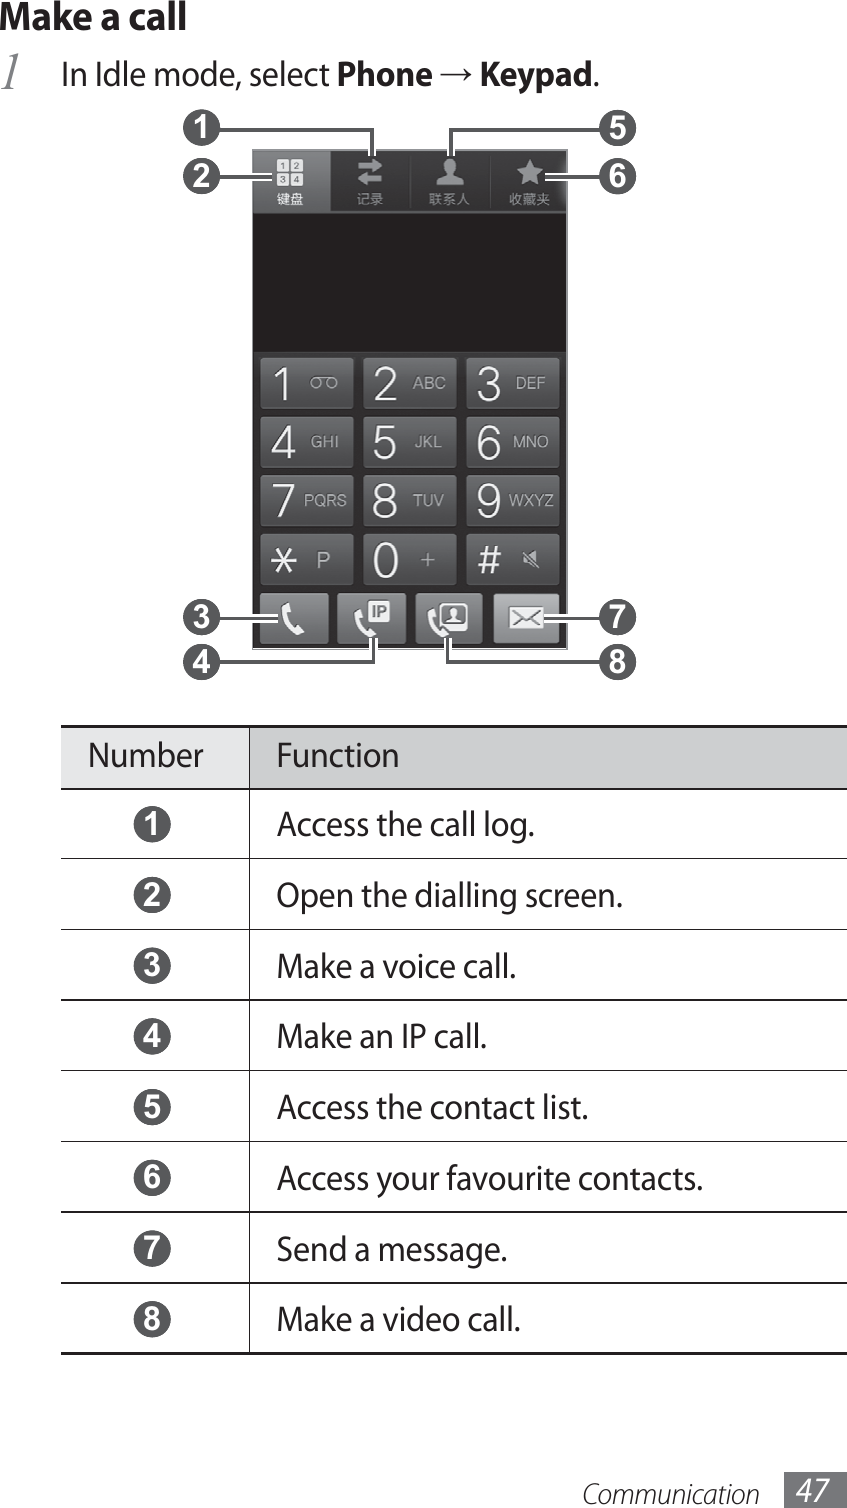 Communication 47Make a call 1 In Idle mode, select Phone → Keypad. 5  6  7  8  4  3  2  1 Number Function 1 Access the call log. 2 Open the dialling screen. 3 Make a voice call. 4 Make an IP call. 5 Access the contact list. 6 Access your favourite contacts. 7 Send a message. 8 Make a video call. 